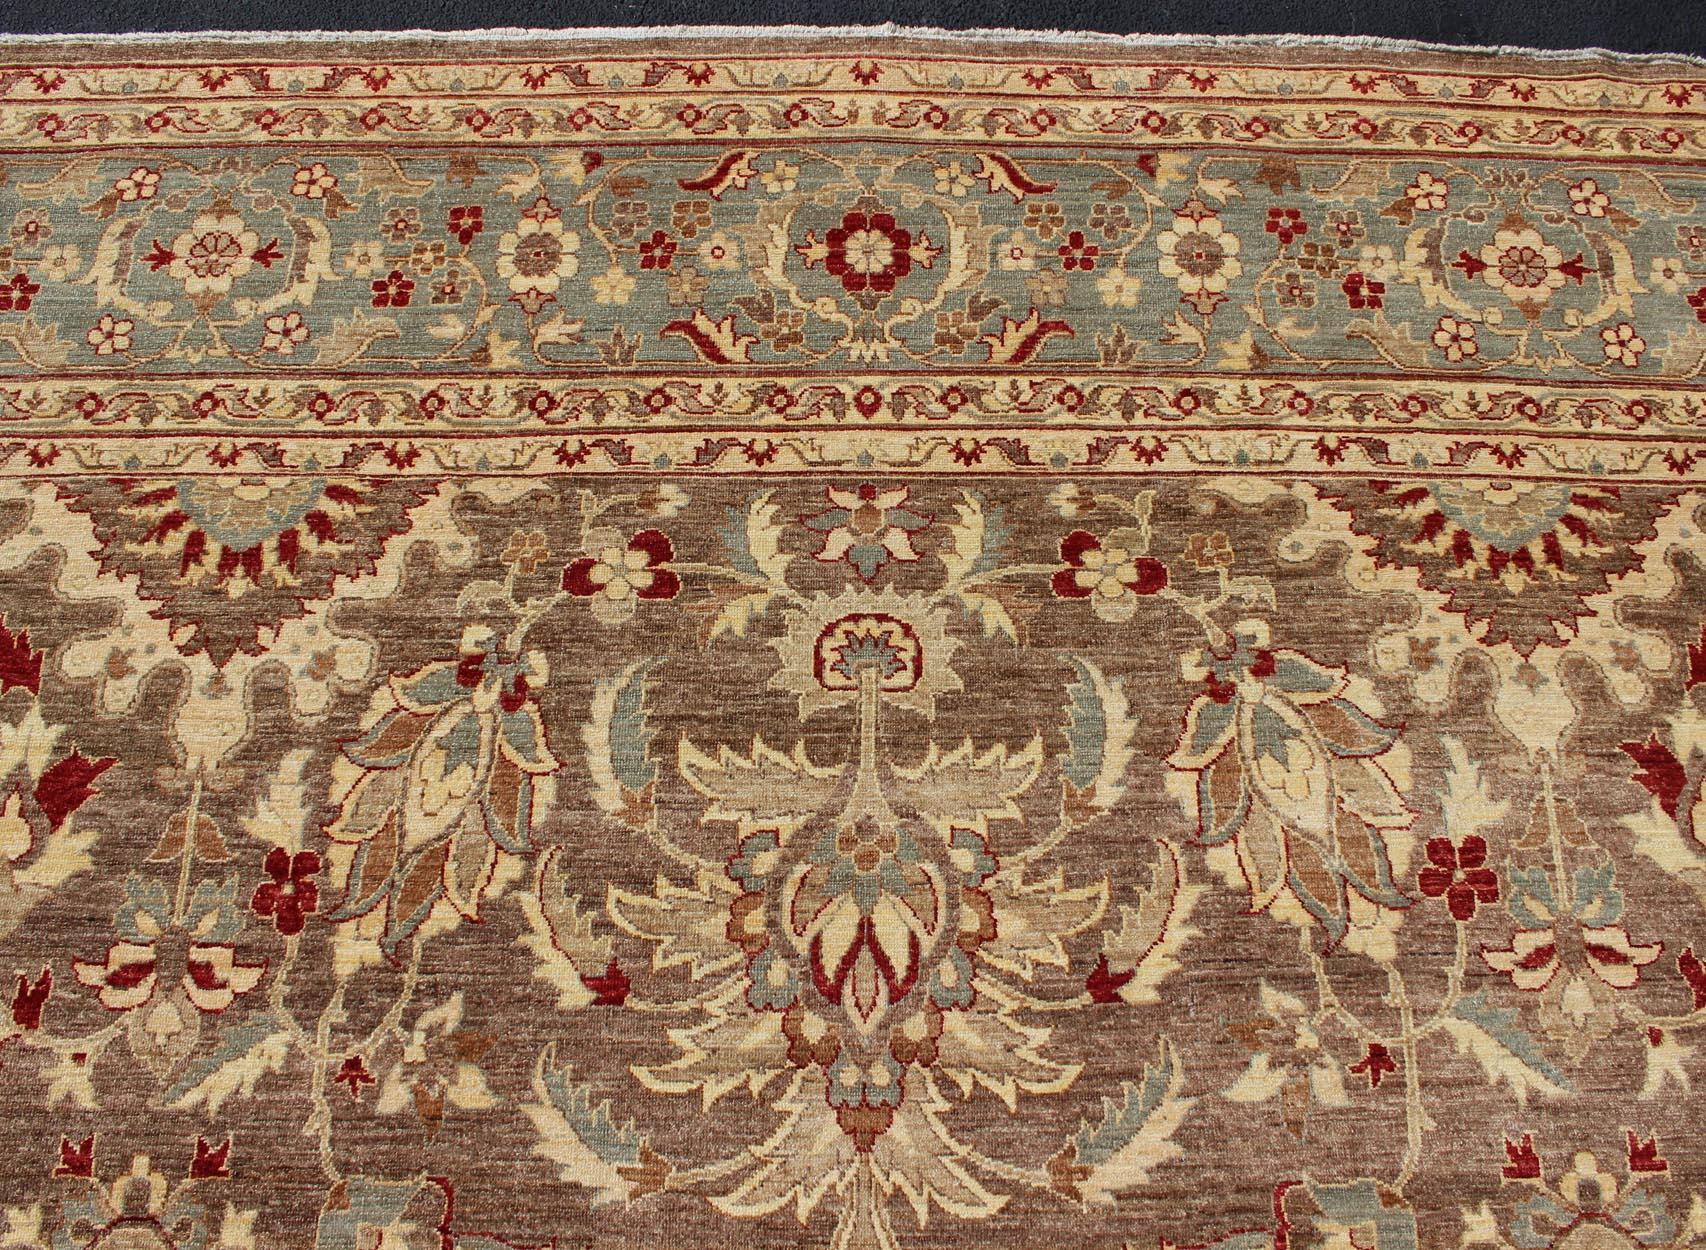 Late 20th Century Large Sultanabad Design Vintage Rug in Brown, Lt. Blue & Red      11' 10